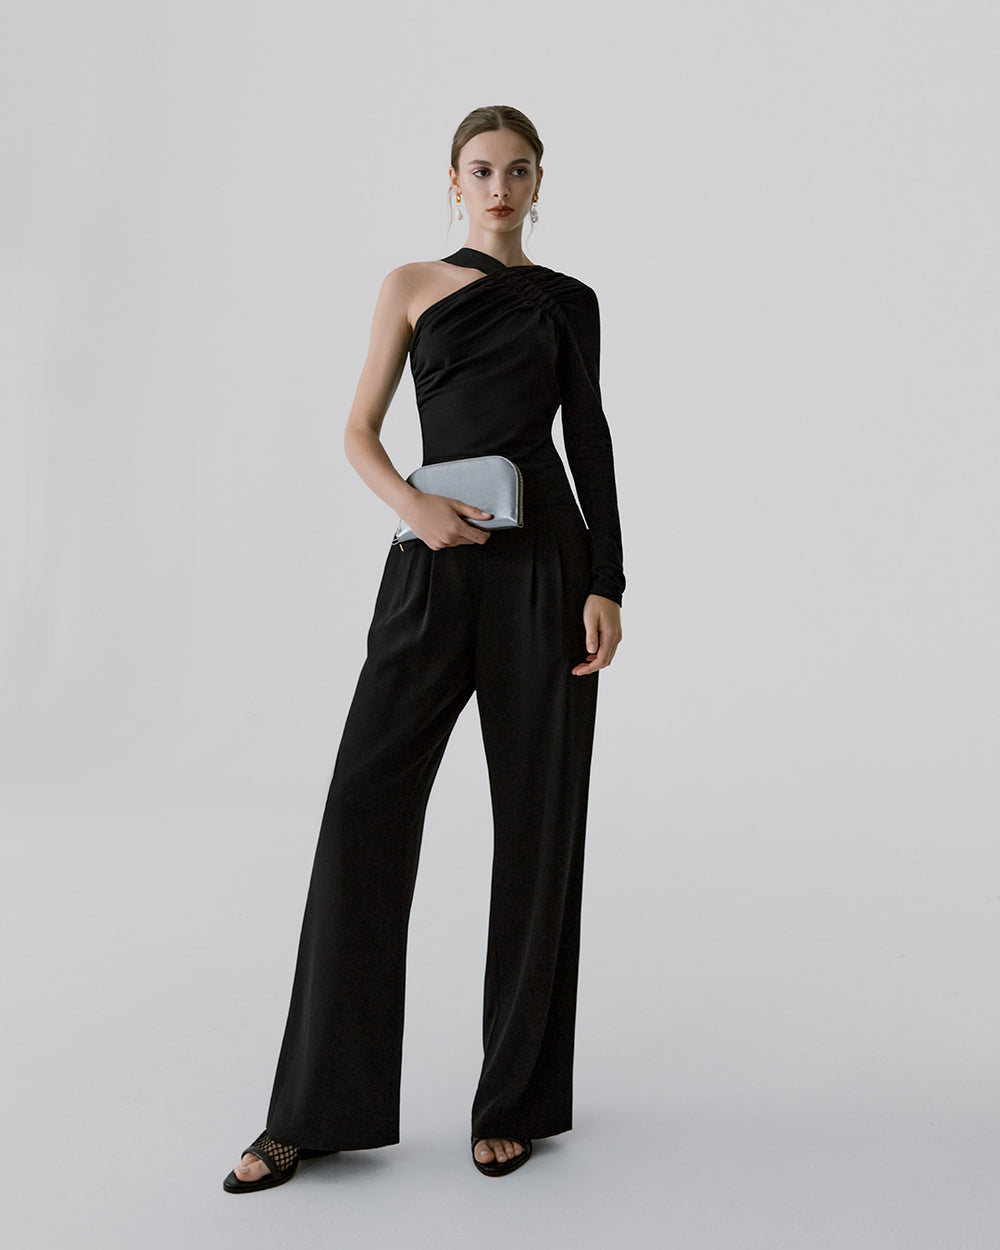 Woman in elegant one-shoulder top and trousers holding a clutch.